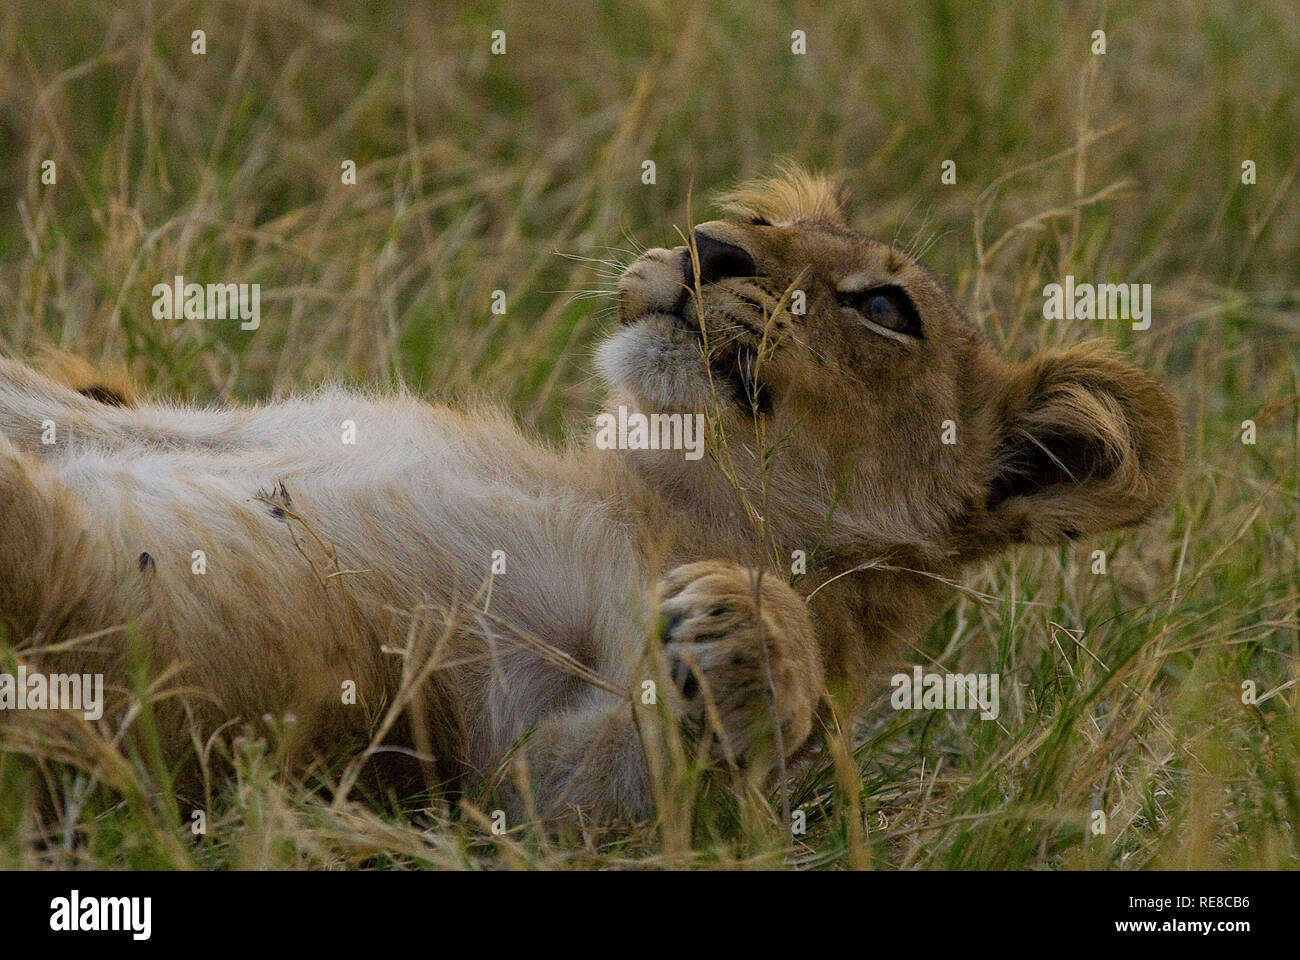 a portrait of a playful lion cub lying in the grass Stock Photo